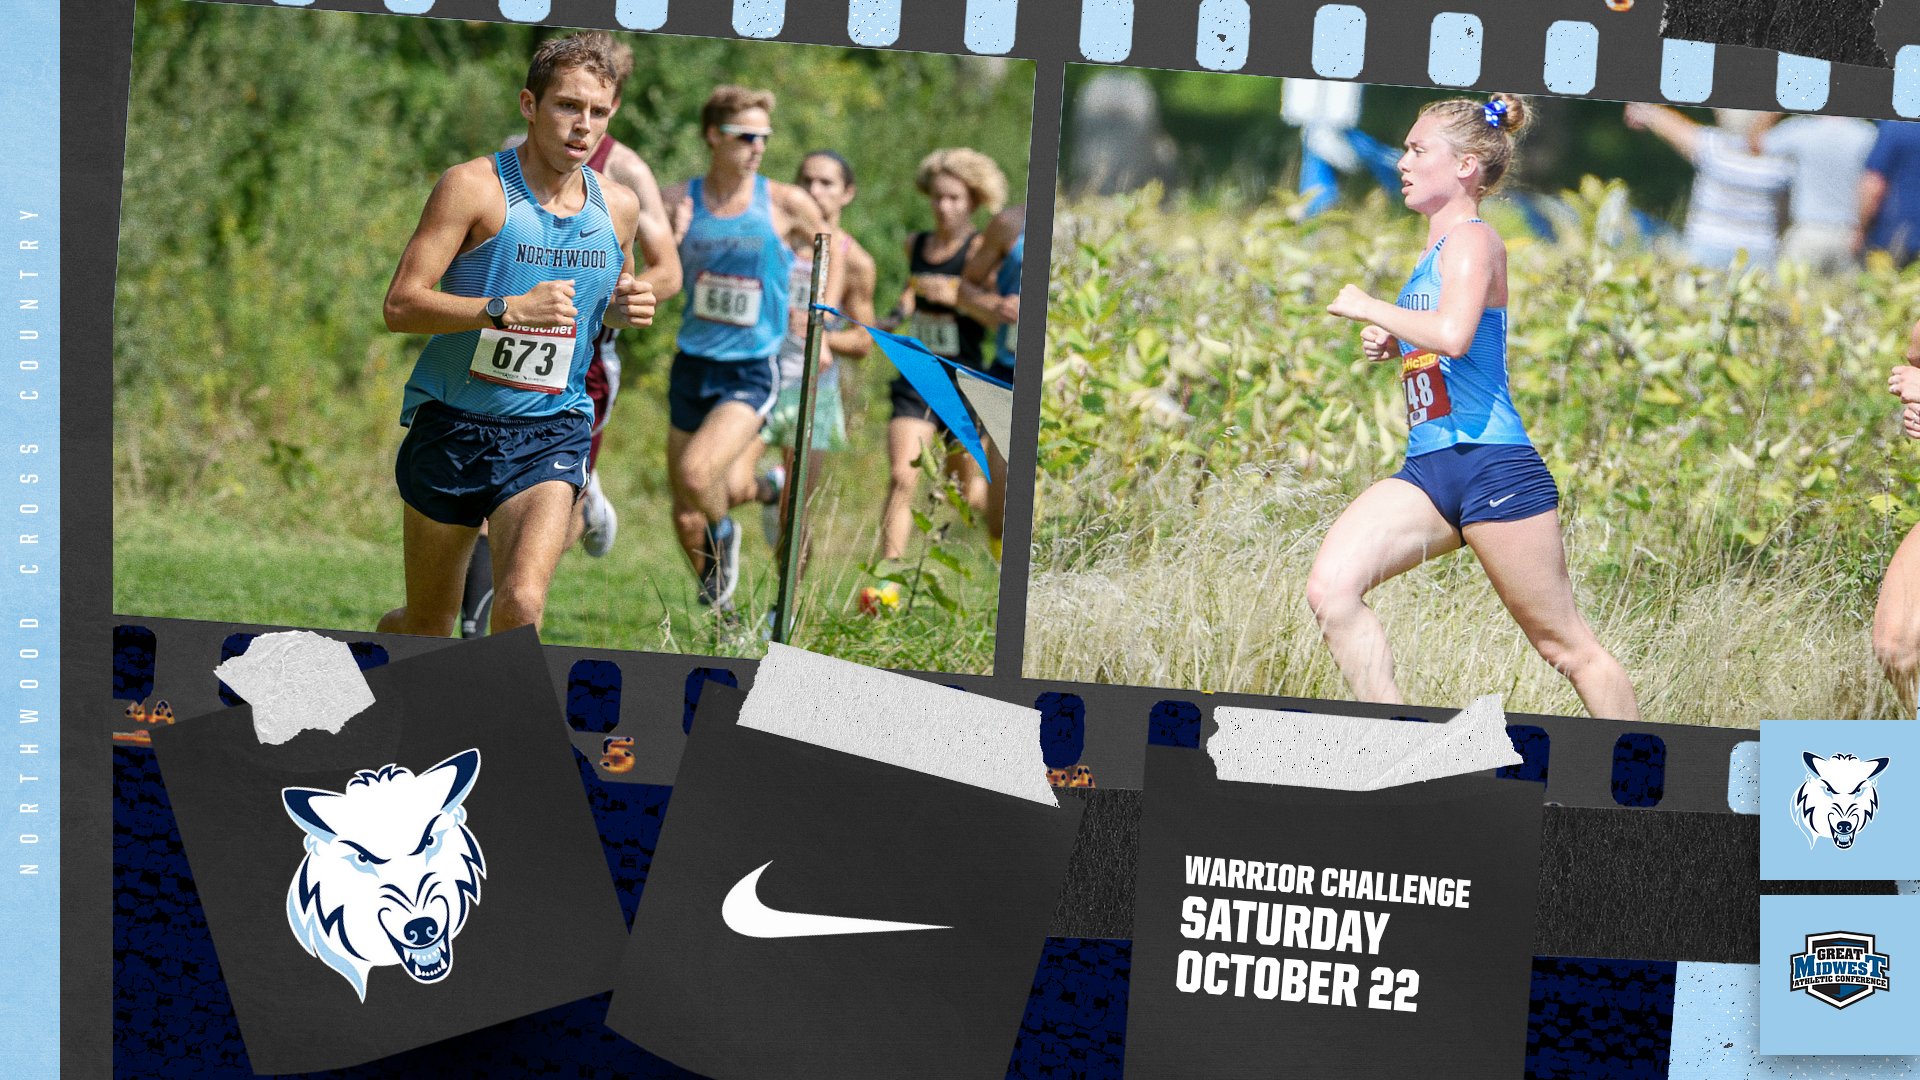 Men's Cross Country Wins The Warrior Challenge As Teams Race In New Boston